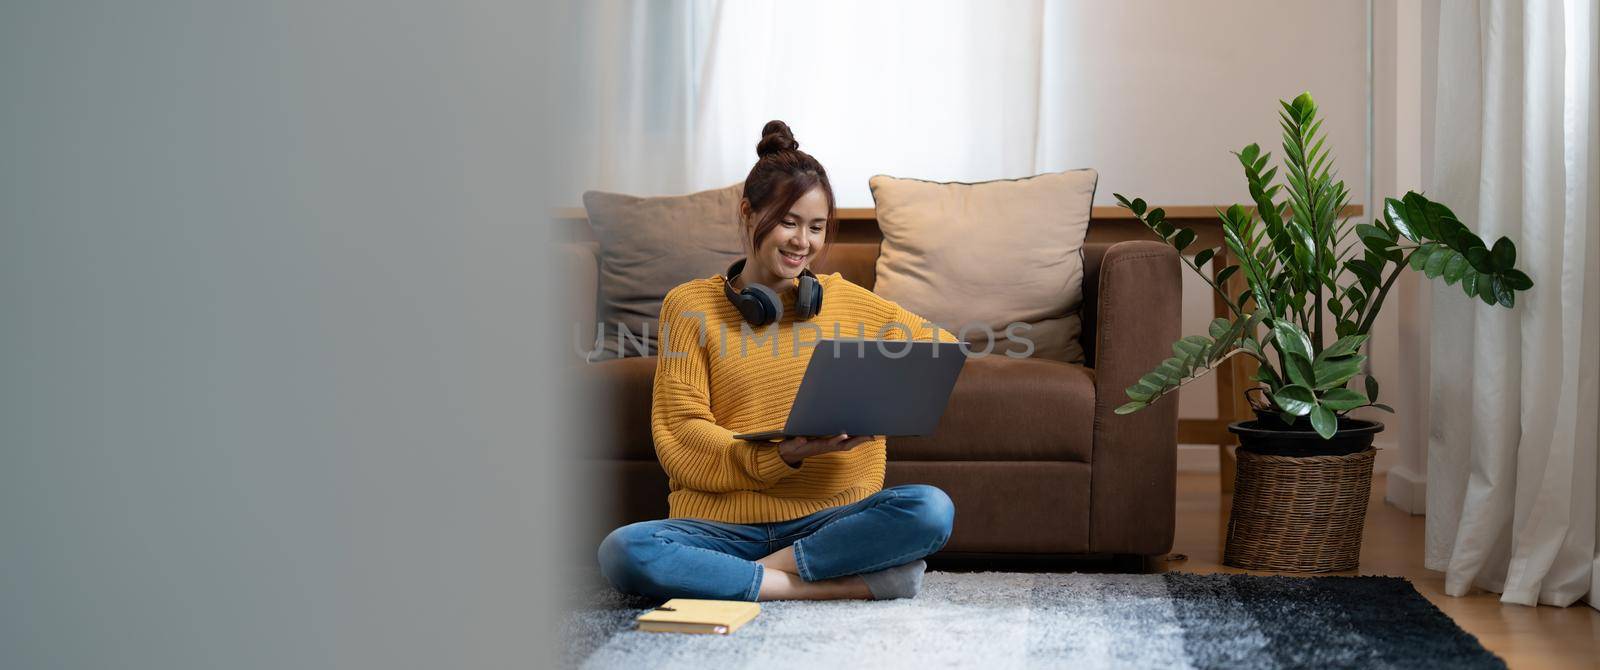 hand typing keyboard laptop online chatting search form internet while working sitting on floor.concept for work from home.technology device contact communication business people by nateemee